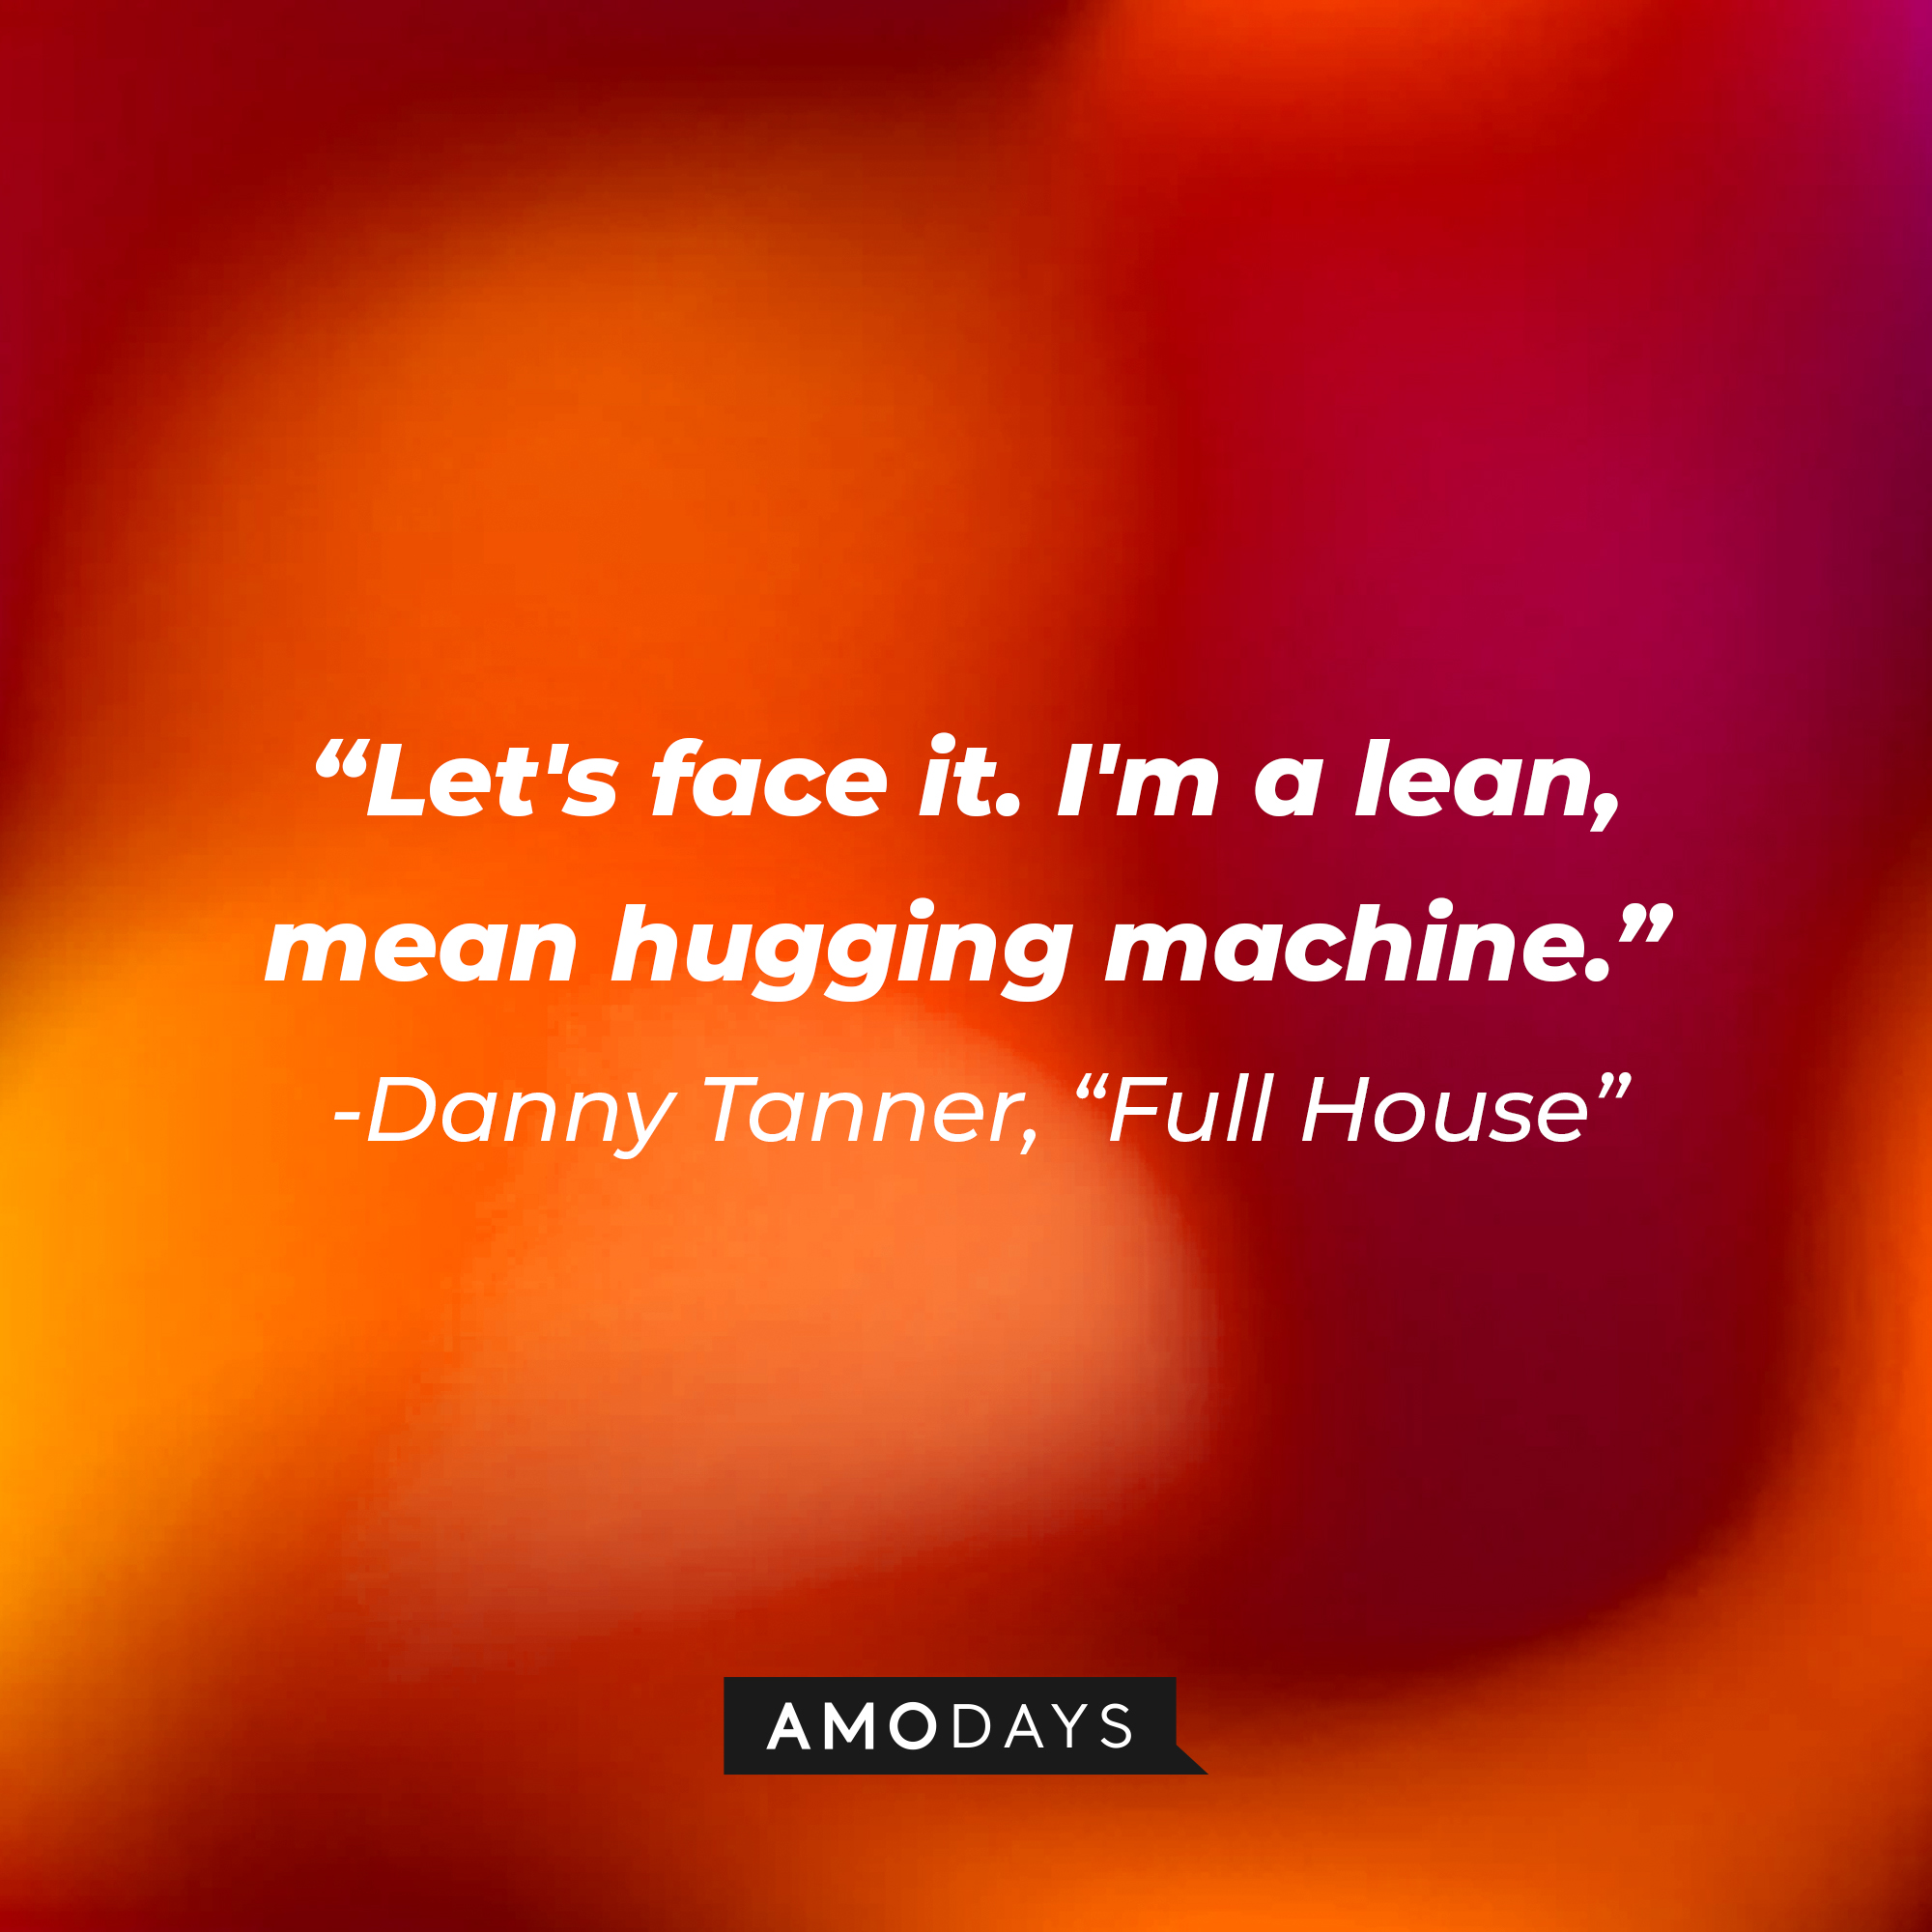 Danny Tanner's quote from "Full House" : "Let's face it. I'm a lean, mean hugging machine" | Source: facebook.com/FullHouseTVshow